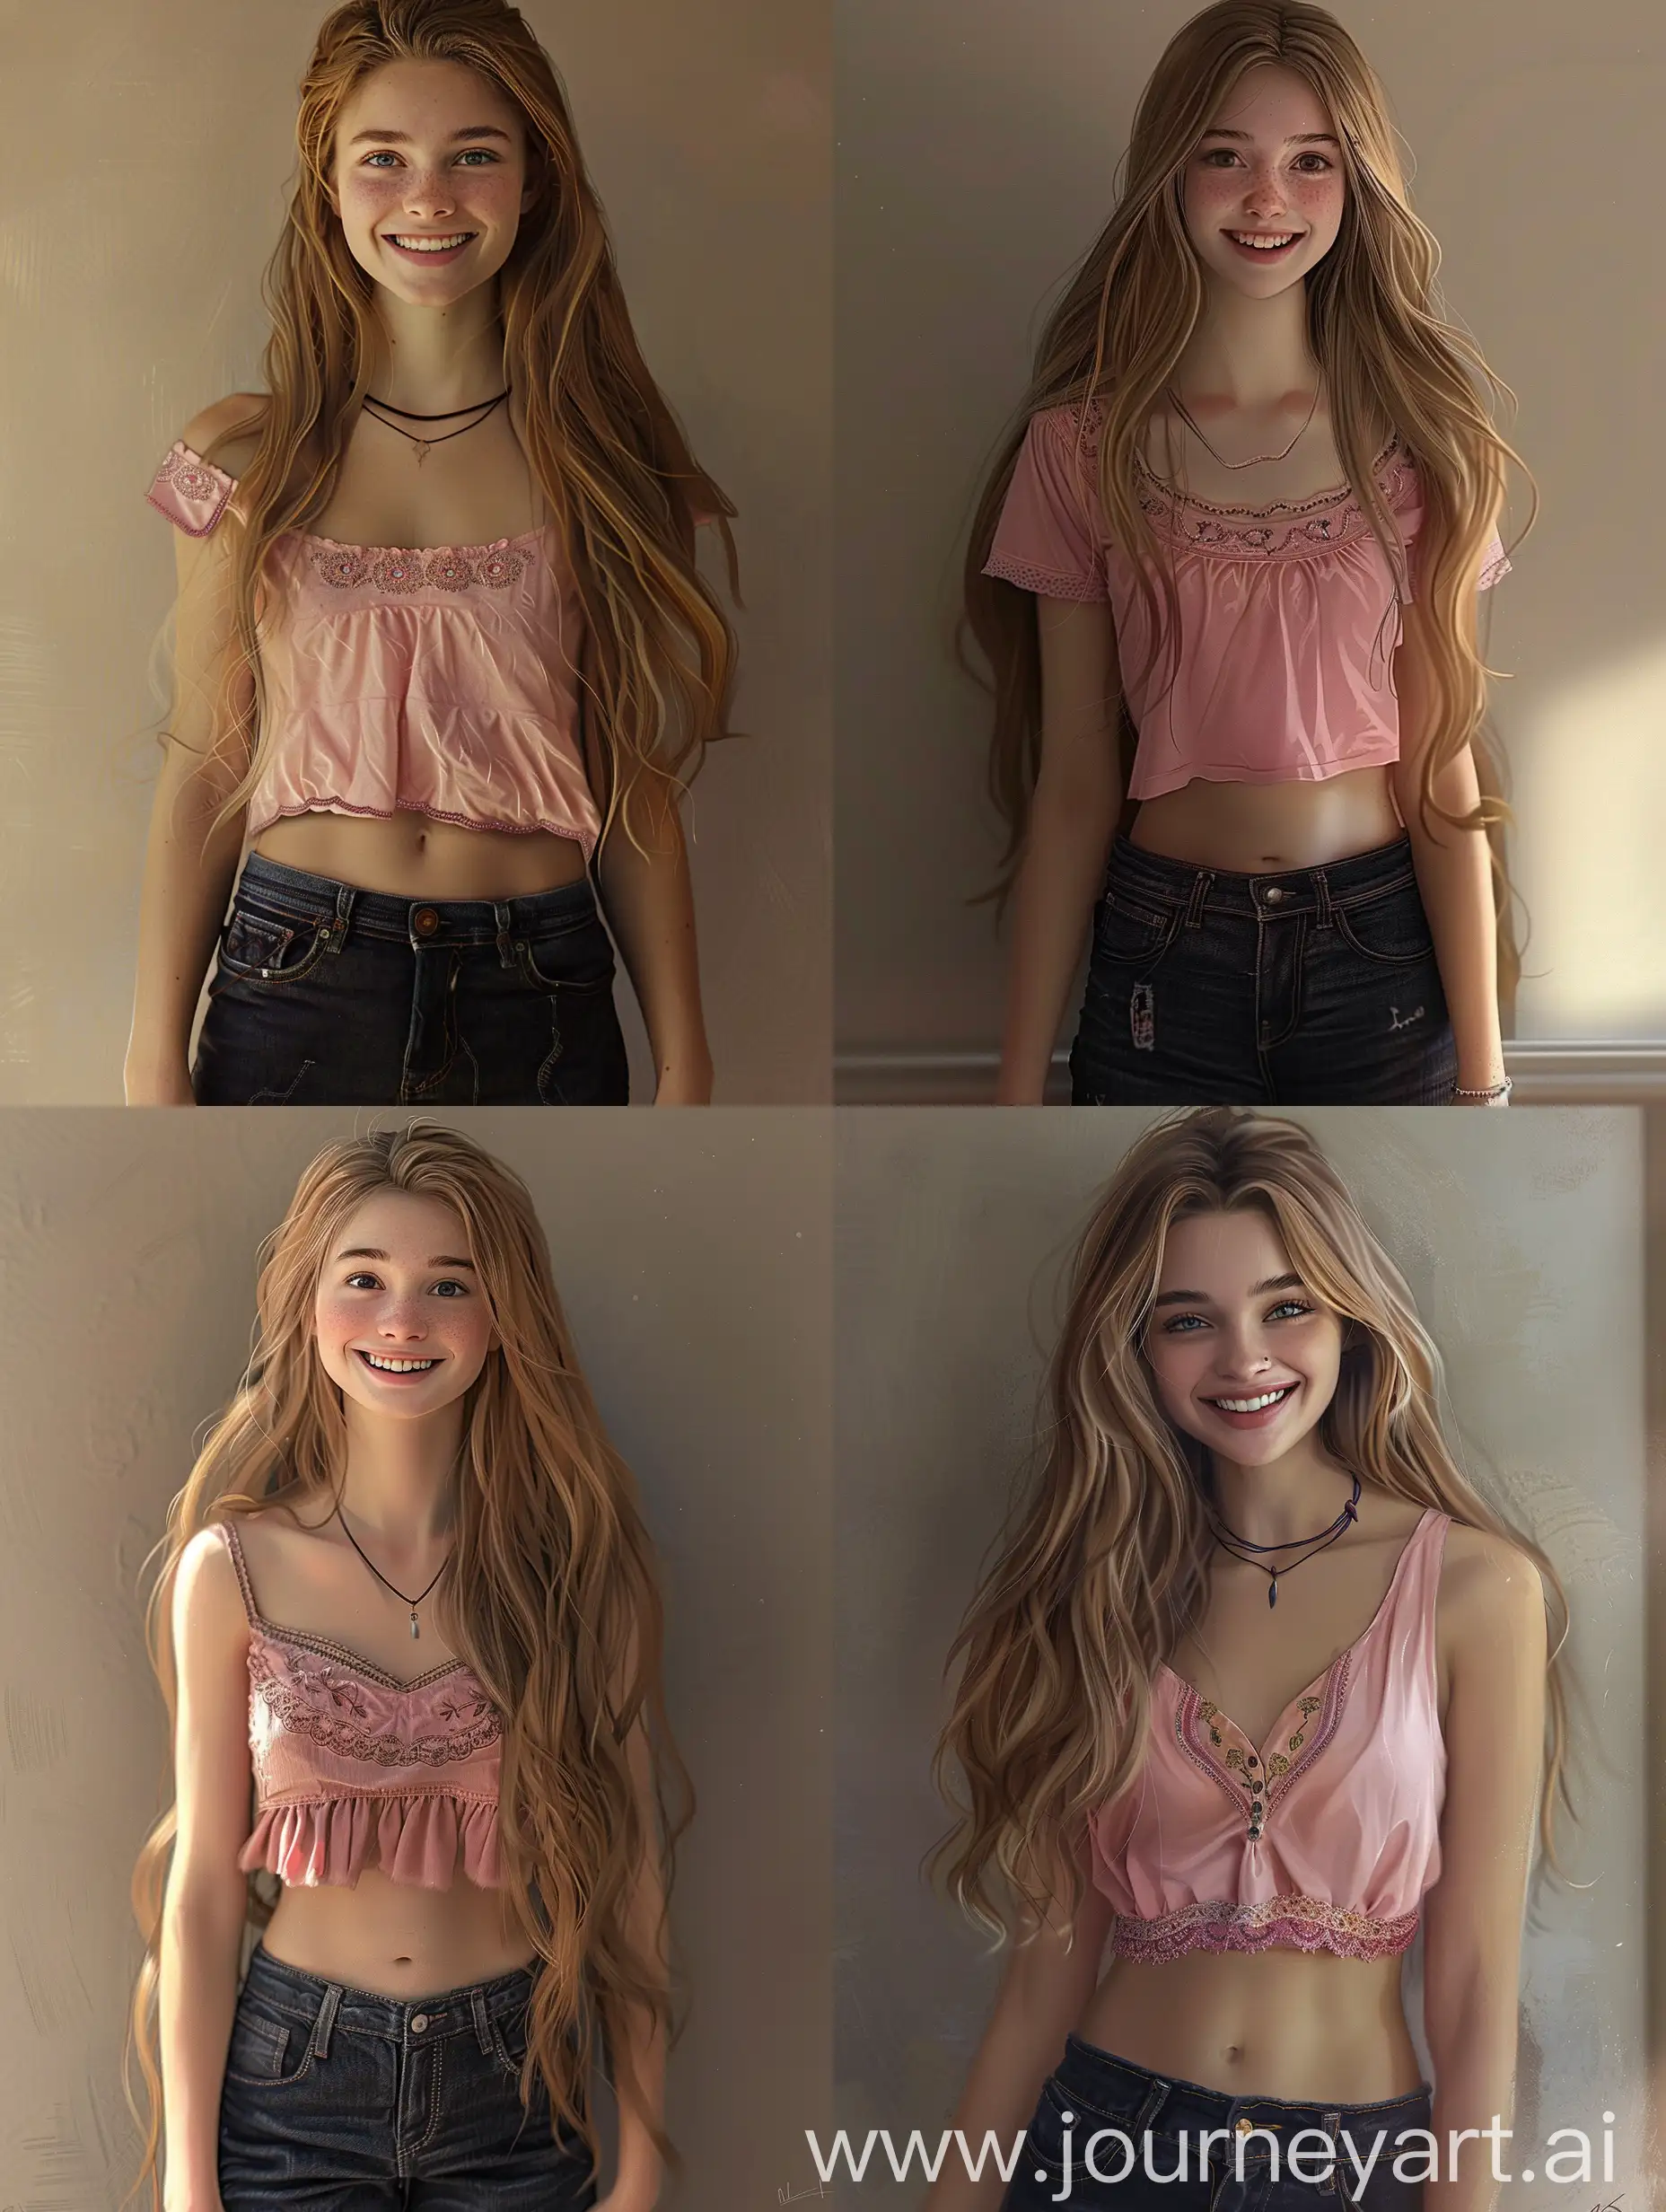 Create an image of a young woman with long, blonde hair and fair skin, smilling, reflecting a natural and confident look. She should have expressive eyes, delicate features, and an overall vibrant presence. She wears a pink top with intricate embroidery around the neckline, paired with dark jeans, emphasizing a casual yet stylish appearance. The background should be simple, with a neutral wall to keep the focus on the character. The lighting should be soft and natural, highlighting her features and the details of her outfit. Ensure the overall look is realistic and lifelike.